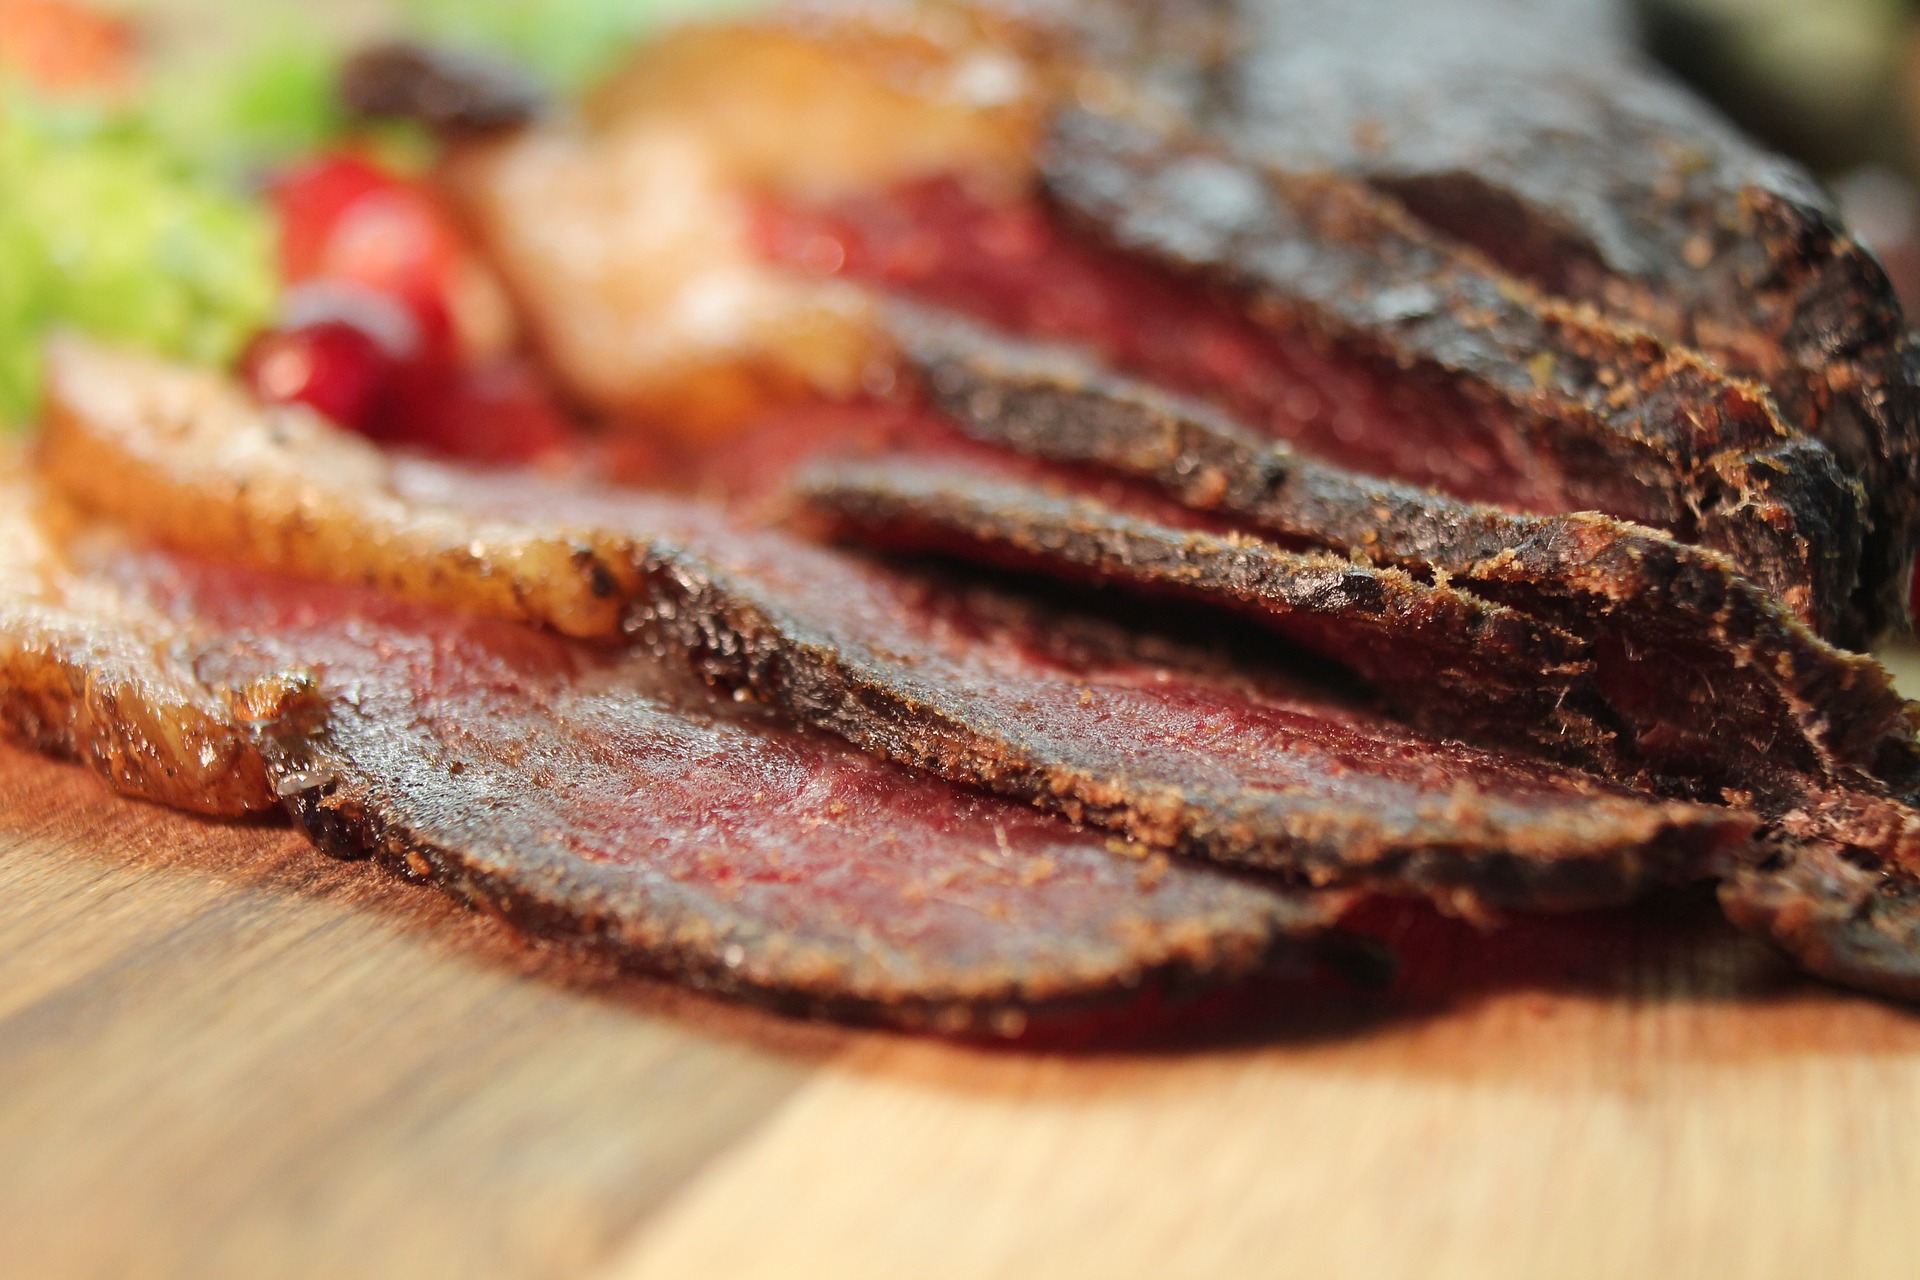 Bak kwa (dried meat) has gone through a lot of changes over the years. (Photo / Retrieved from Pixabay)